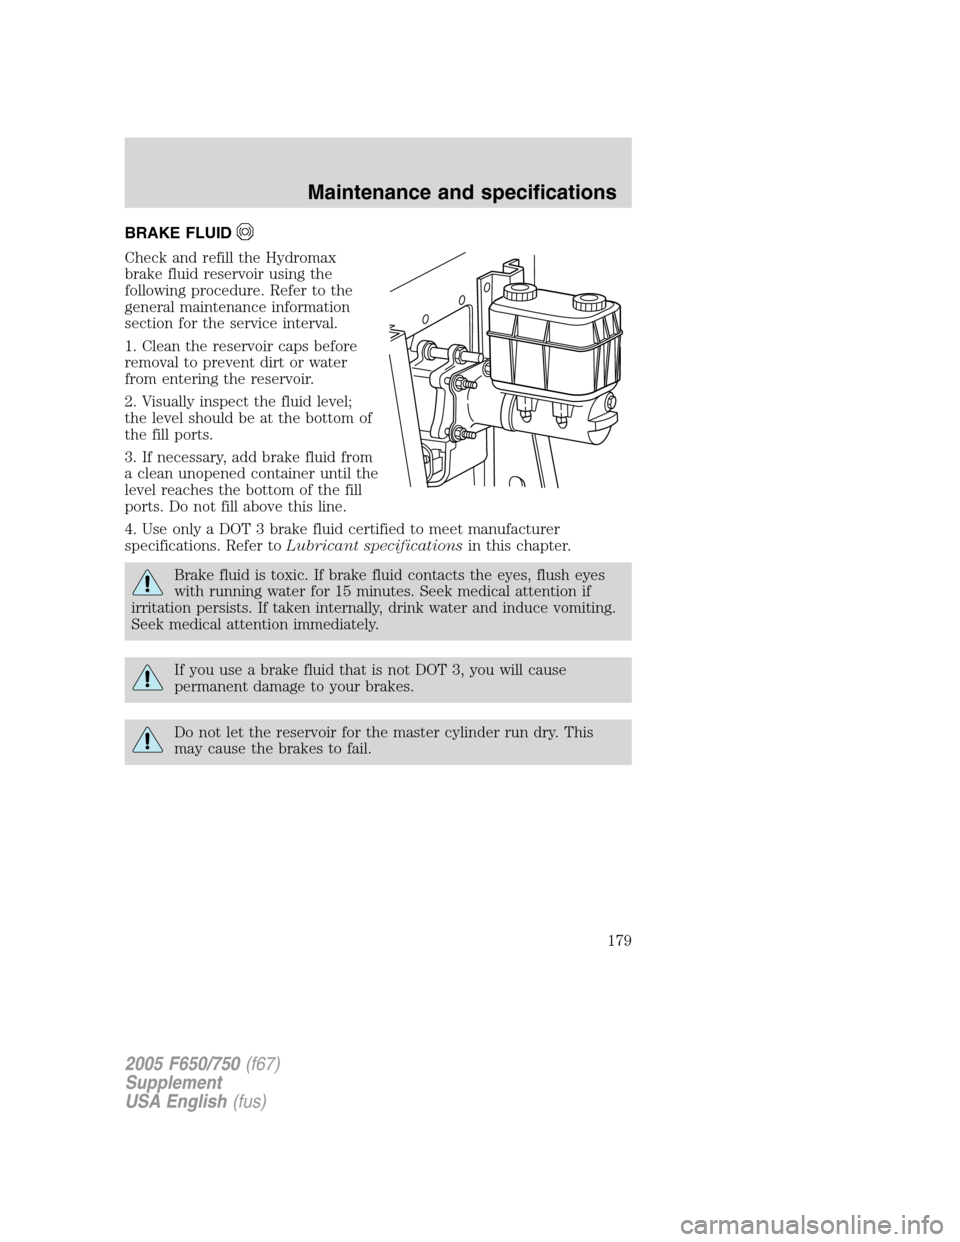 FORD F750 2005 11.G Owners Manual BRAKE FLUID
Check and refill the Hydromax
brake fluid reservoir using the
following procedure. Refer to the
general maintenance information
section for the service interval.
1. Clean the reservoir cap